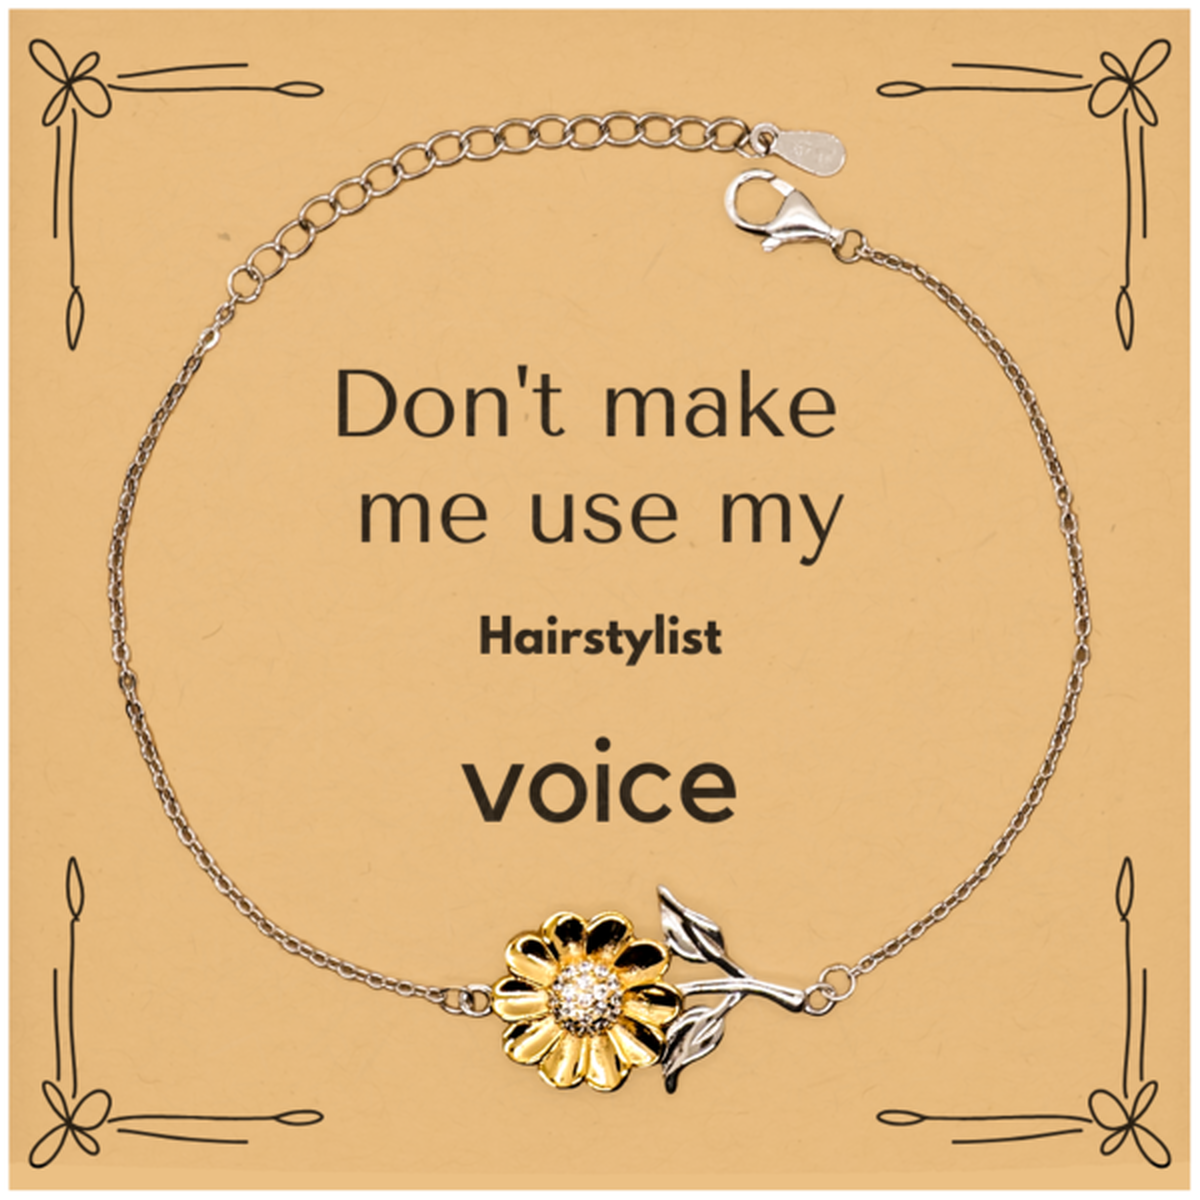 Don't make me use my Hairstylist voice, Sarcasm Hairstylist Card Gifts, Christmas Hairstylist Sunflower Bracelet Birthday Unique Gifts For Hairstylist Coworkers, Men, Women, Colleague, Friends